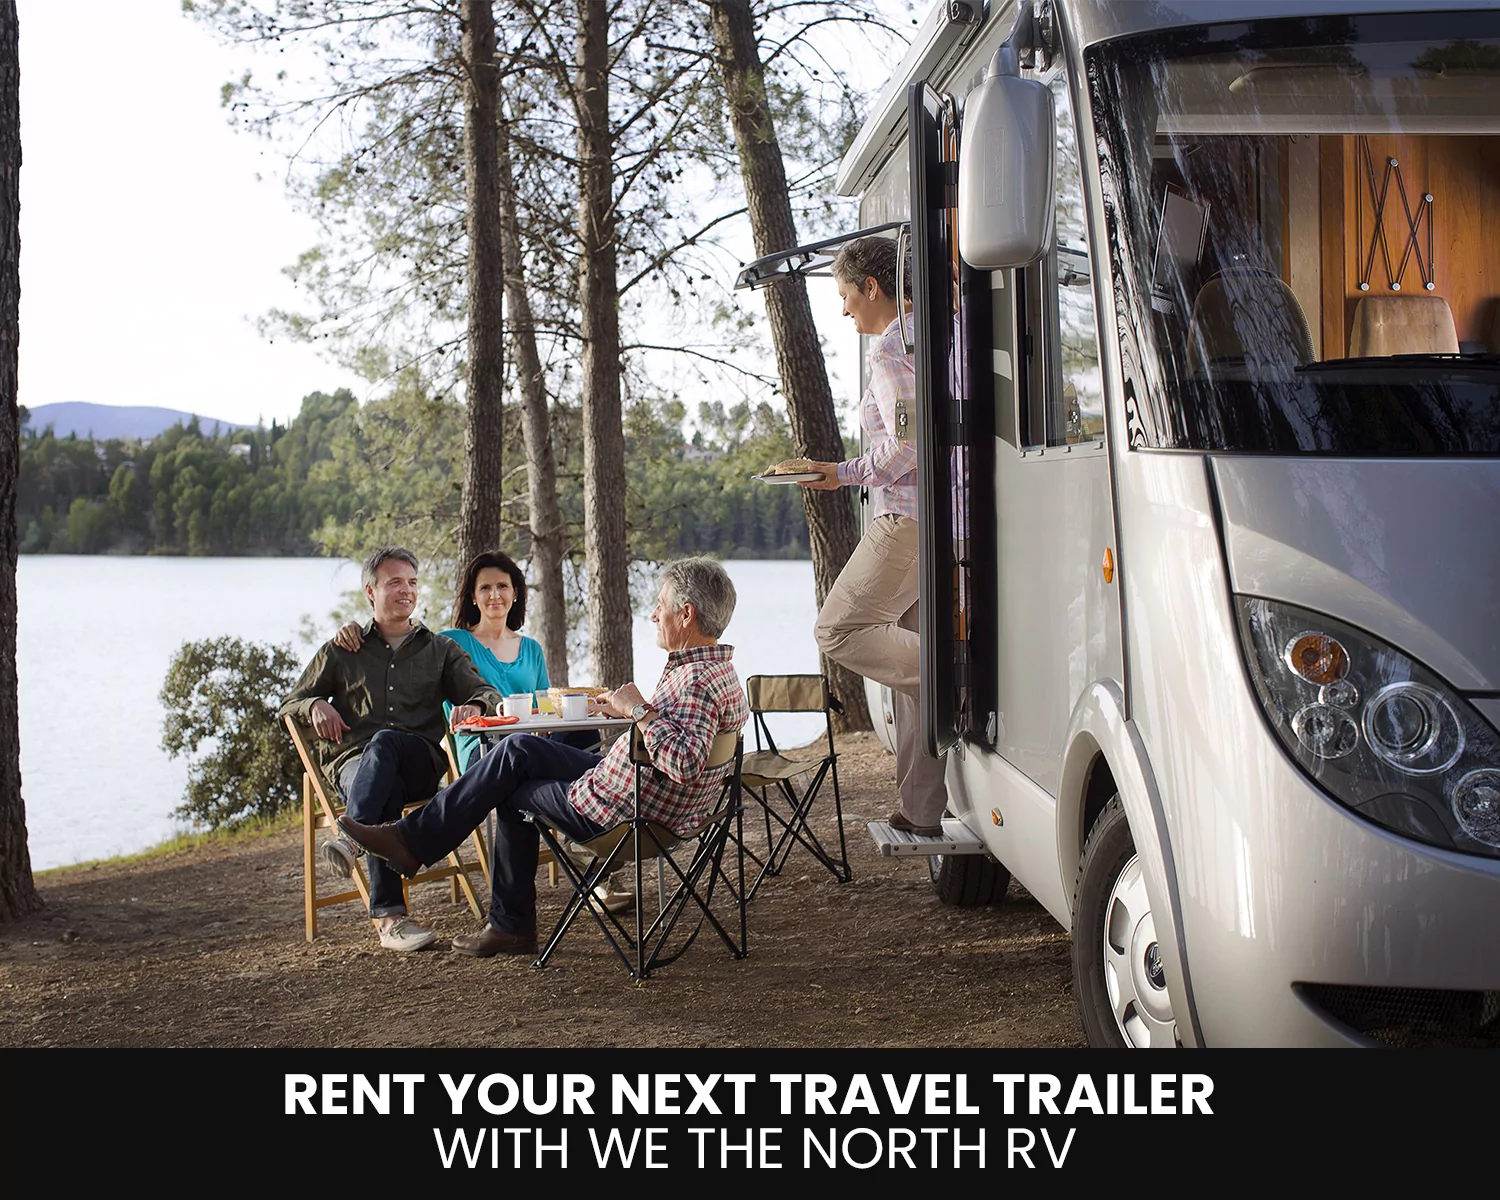 Rent Your Next Travel Trailer With We The North RV